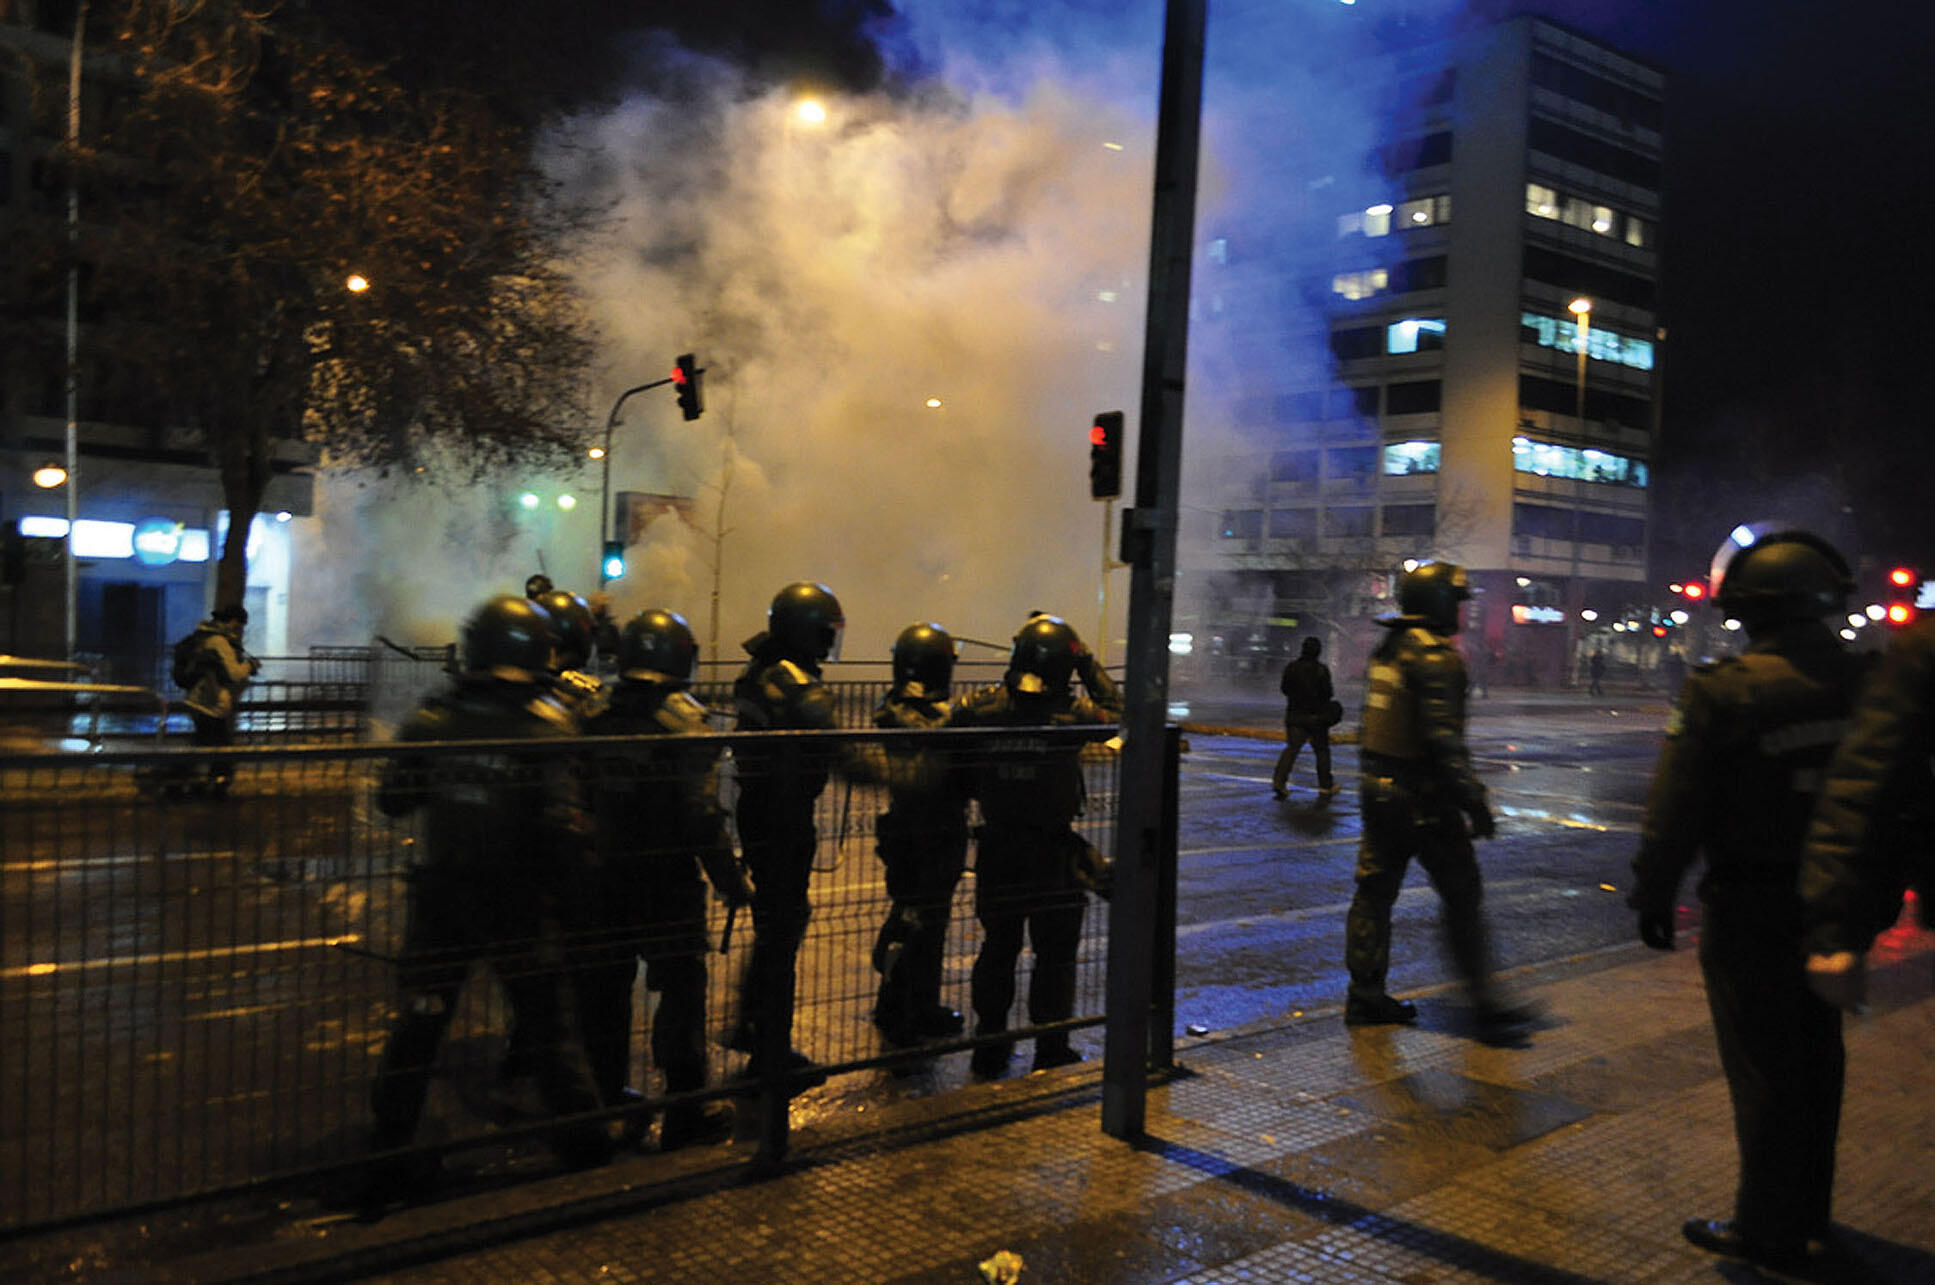 Chilean police in riot great respond to a student demonstration at night with tear gas,  August 2011. (Photo by Fabiola Torres.)